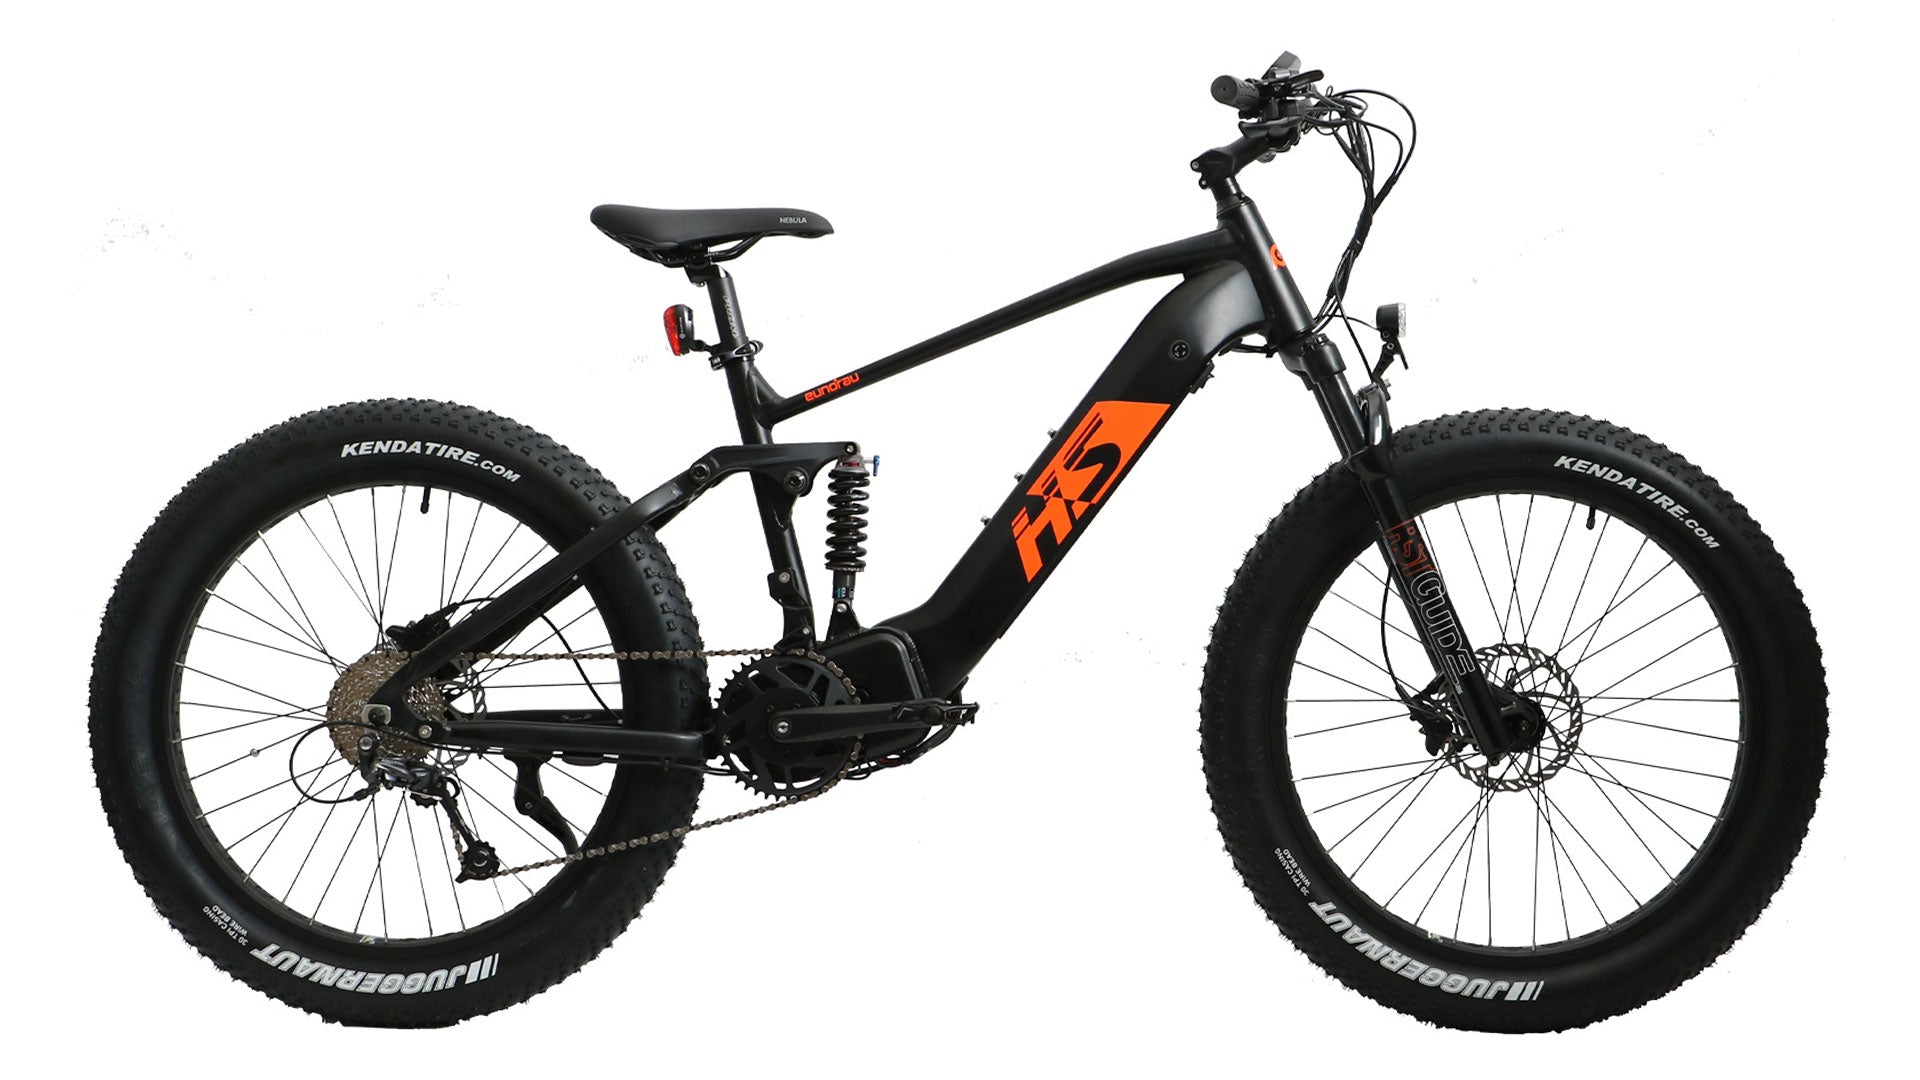 EUNORAU FAT-HS 26" Fat Tire 1000W E-Bike, with a powerful BAFANG M615 mid motor and cadence sensor for ultimate trail performance. The aluminum alloy frame comes with dual suspension, RST GUIDE 75mm travel fork, and KS-388L shock for a smooth ride. Enjoy an 80-mile range and quick 4-6 hour charging time with the 48V/17Ah SAMSUNG cell lithium-ion battery.